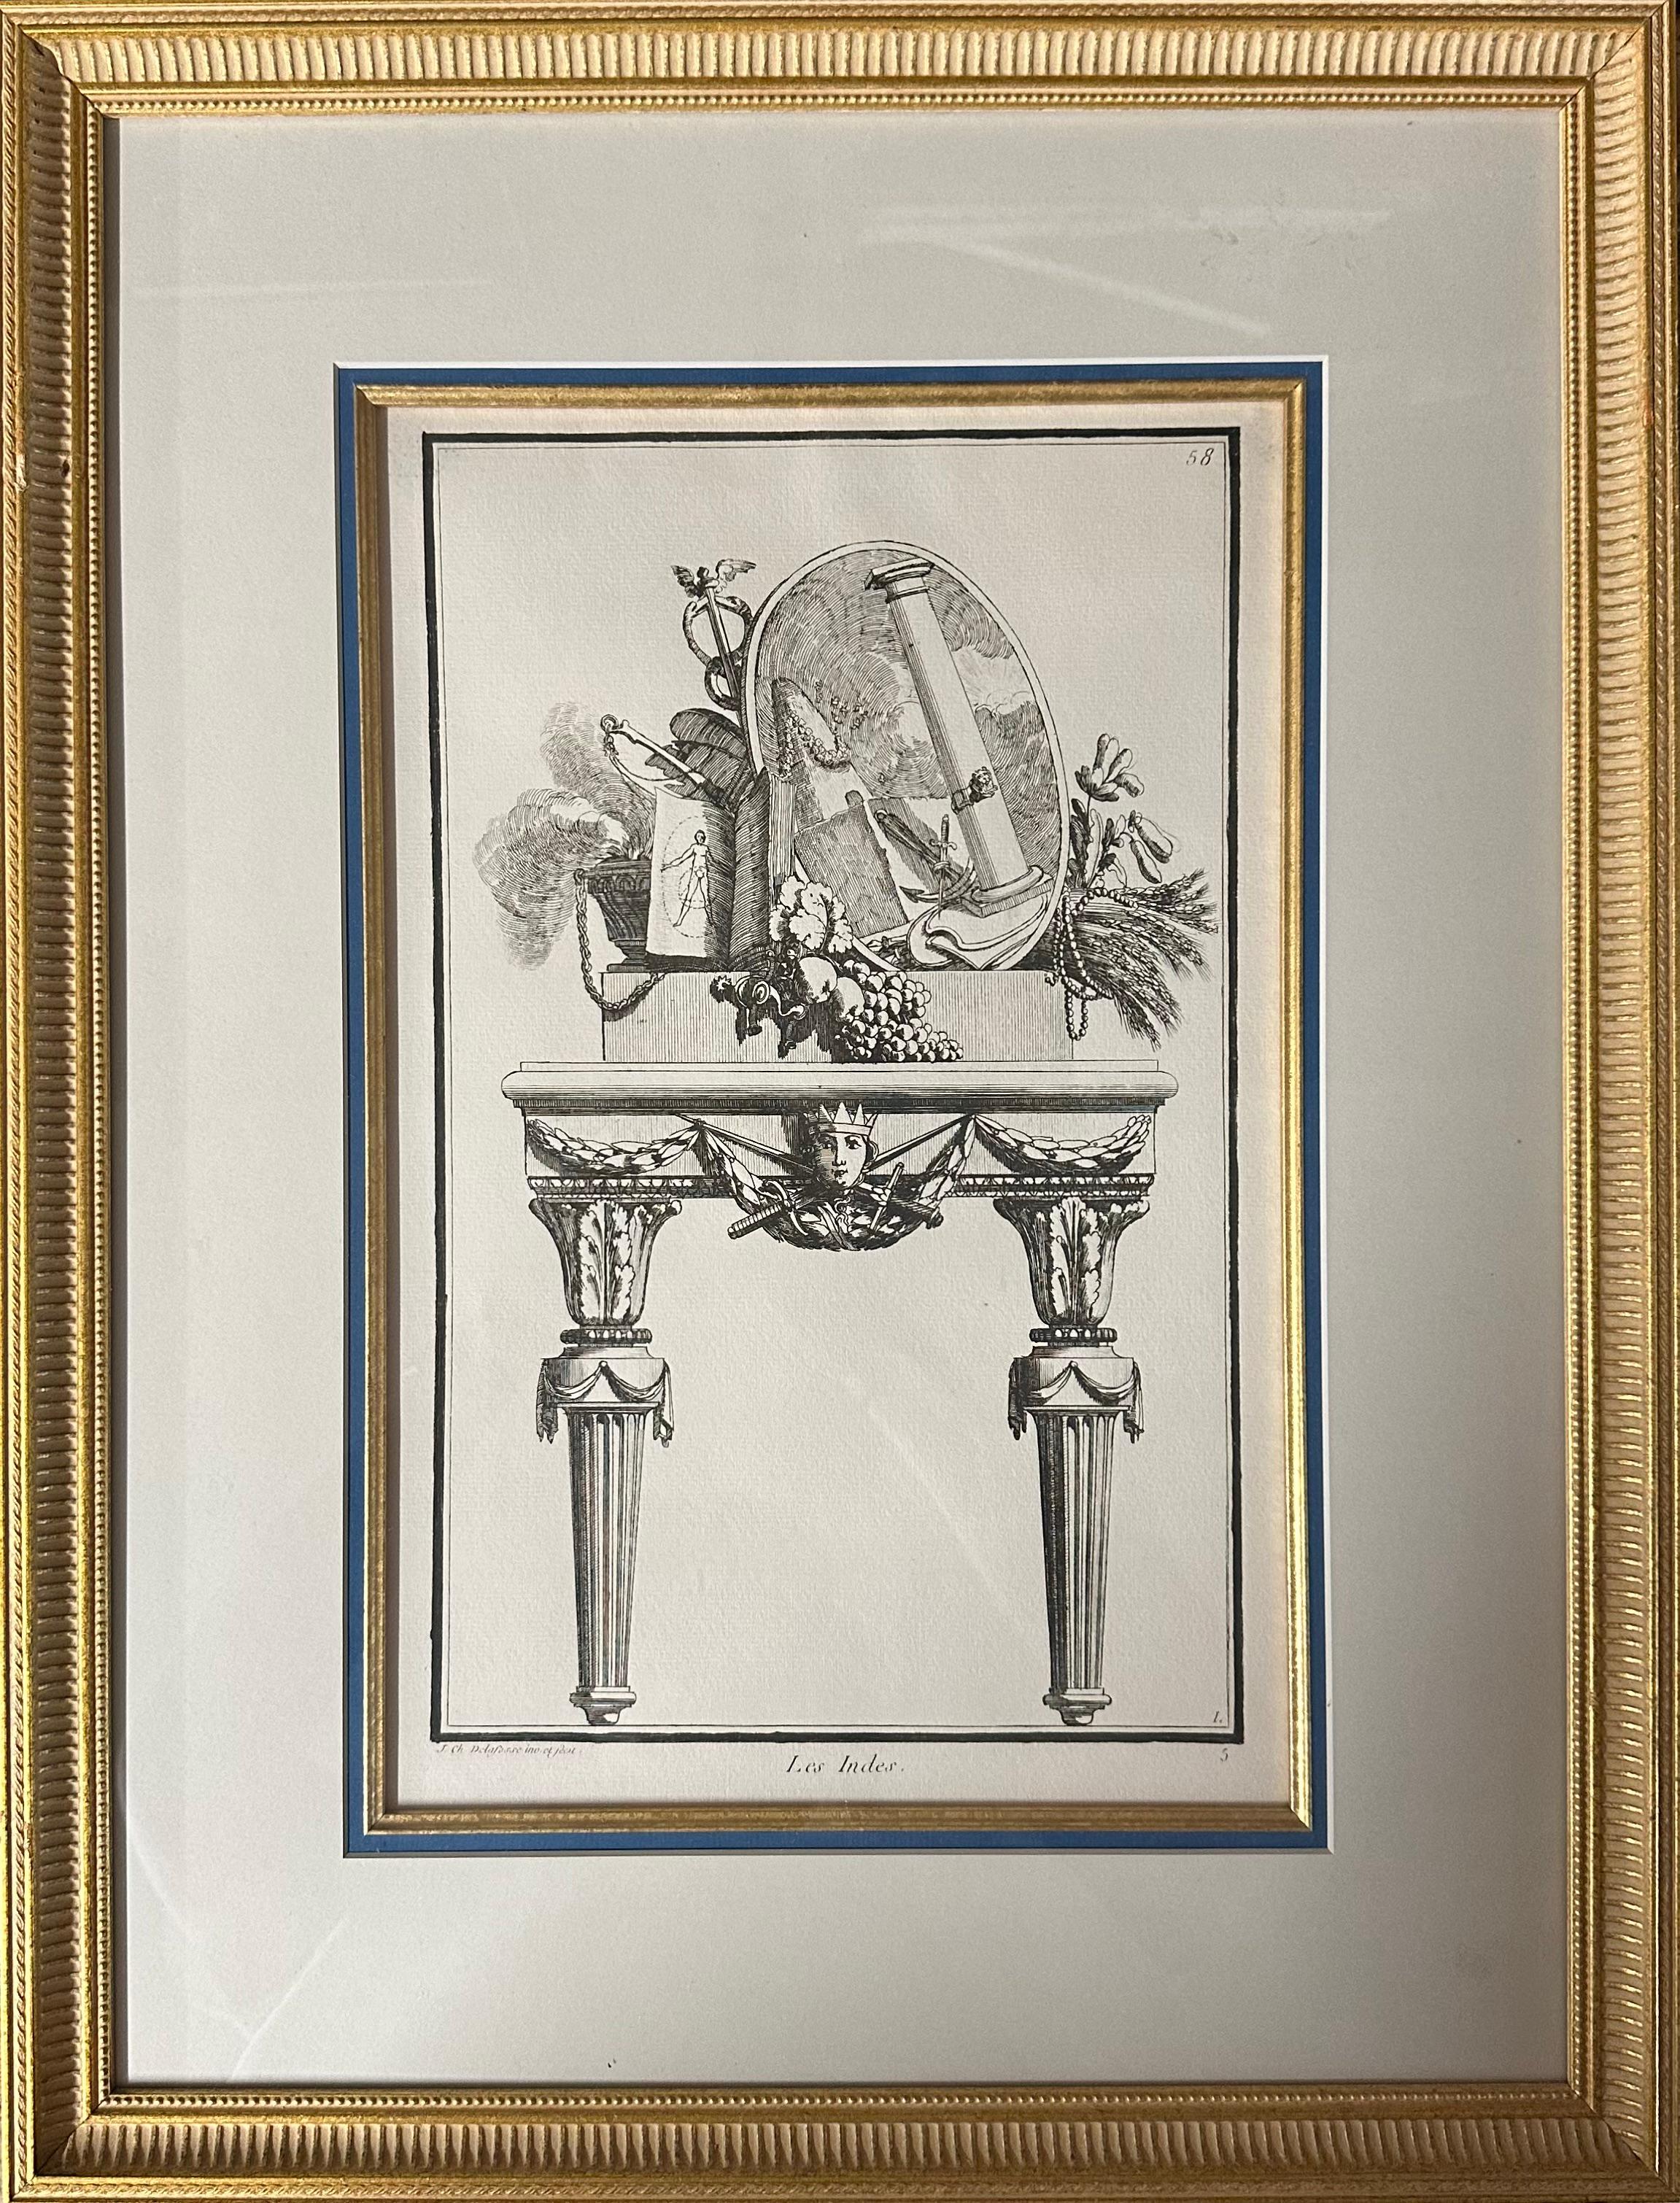 A Collection of Engravings Illustrating 18th Century Furniture and Objects that the artist felt represented certain locations around the world. Switzerland, Asia, Portugal, England, Greece, Persia, Japan, and India. Gilt frames with double blue mats